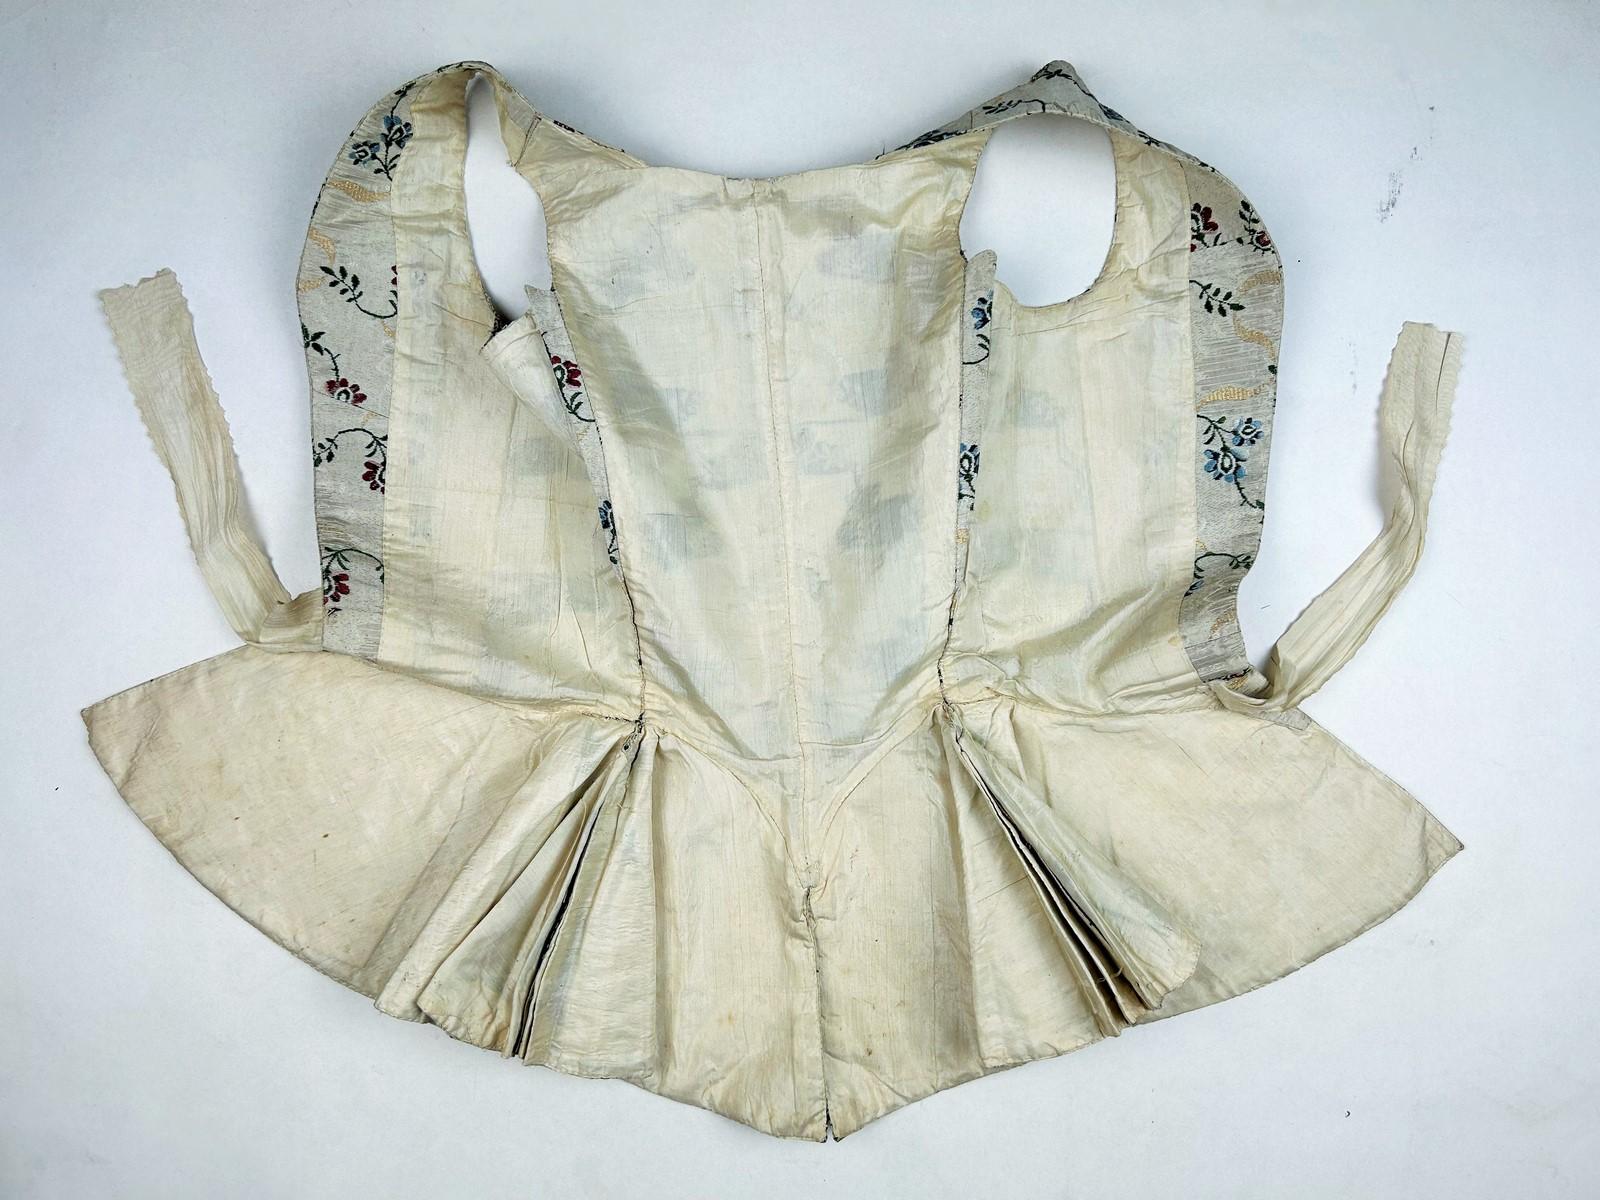 Amazon bodice in silver and gold lamé cloth - England or Europe Circa 1750-1760 For Sale 11